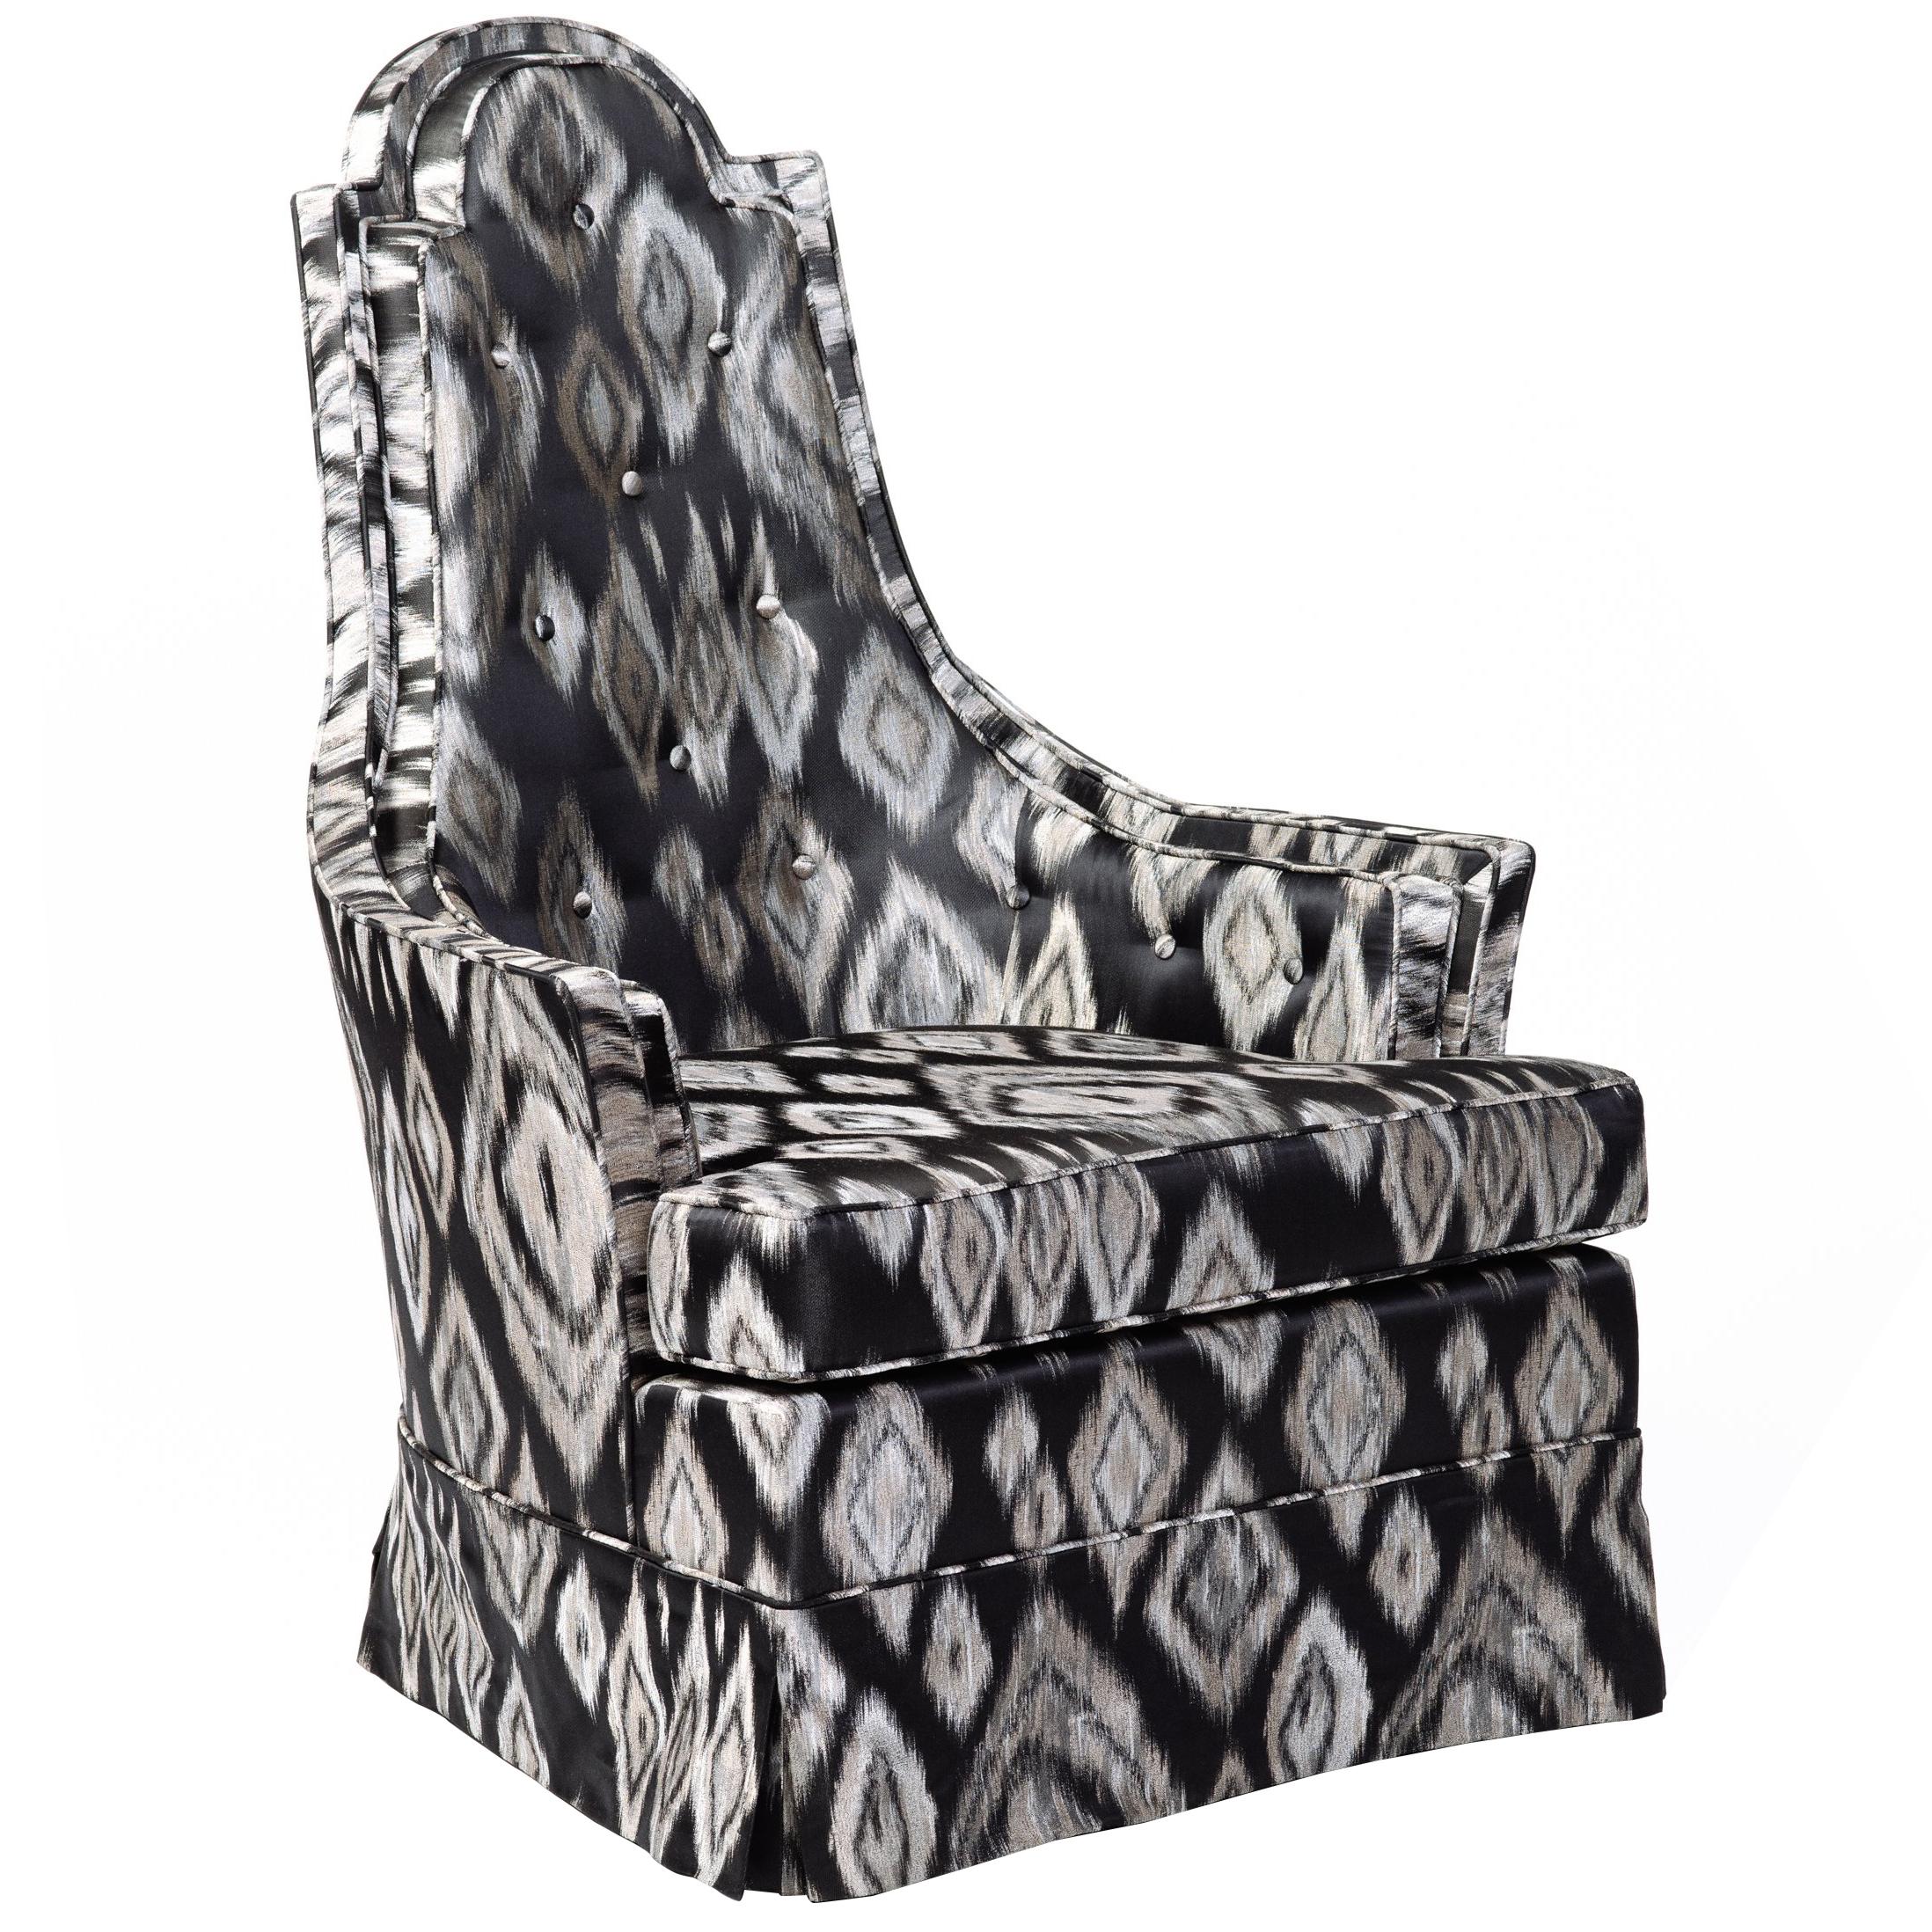 Mid-Century Modern armchair with sculptural high back design. Newly upholstered in graphic black and platinum geometric silk fabric with Ikat print. Chairs has tall shield shaped backs with a gorgeous profile. Features button back accents and